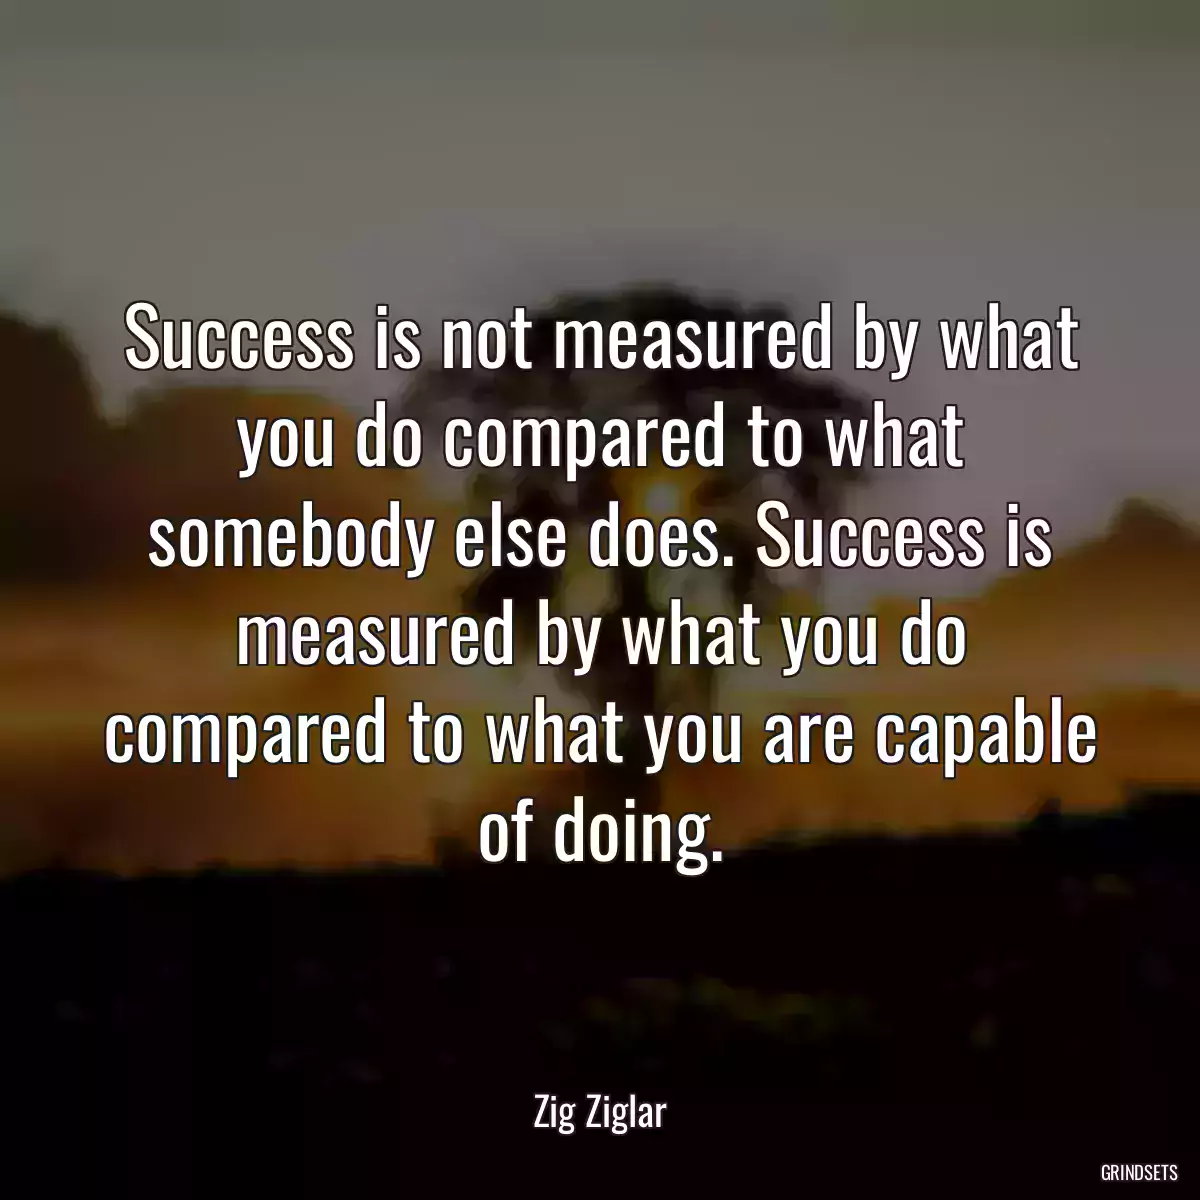 Success is not measured by what you do compared to what somebody else does. Success is measured by what you do compared to what you are capable of doing.